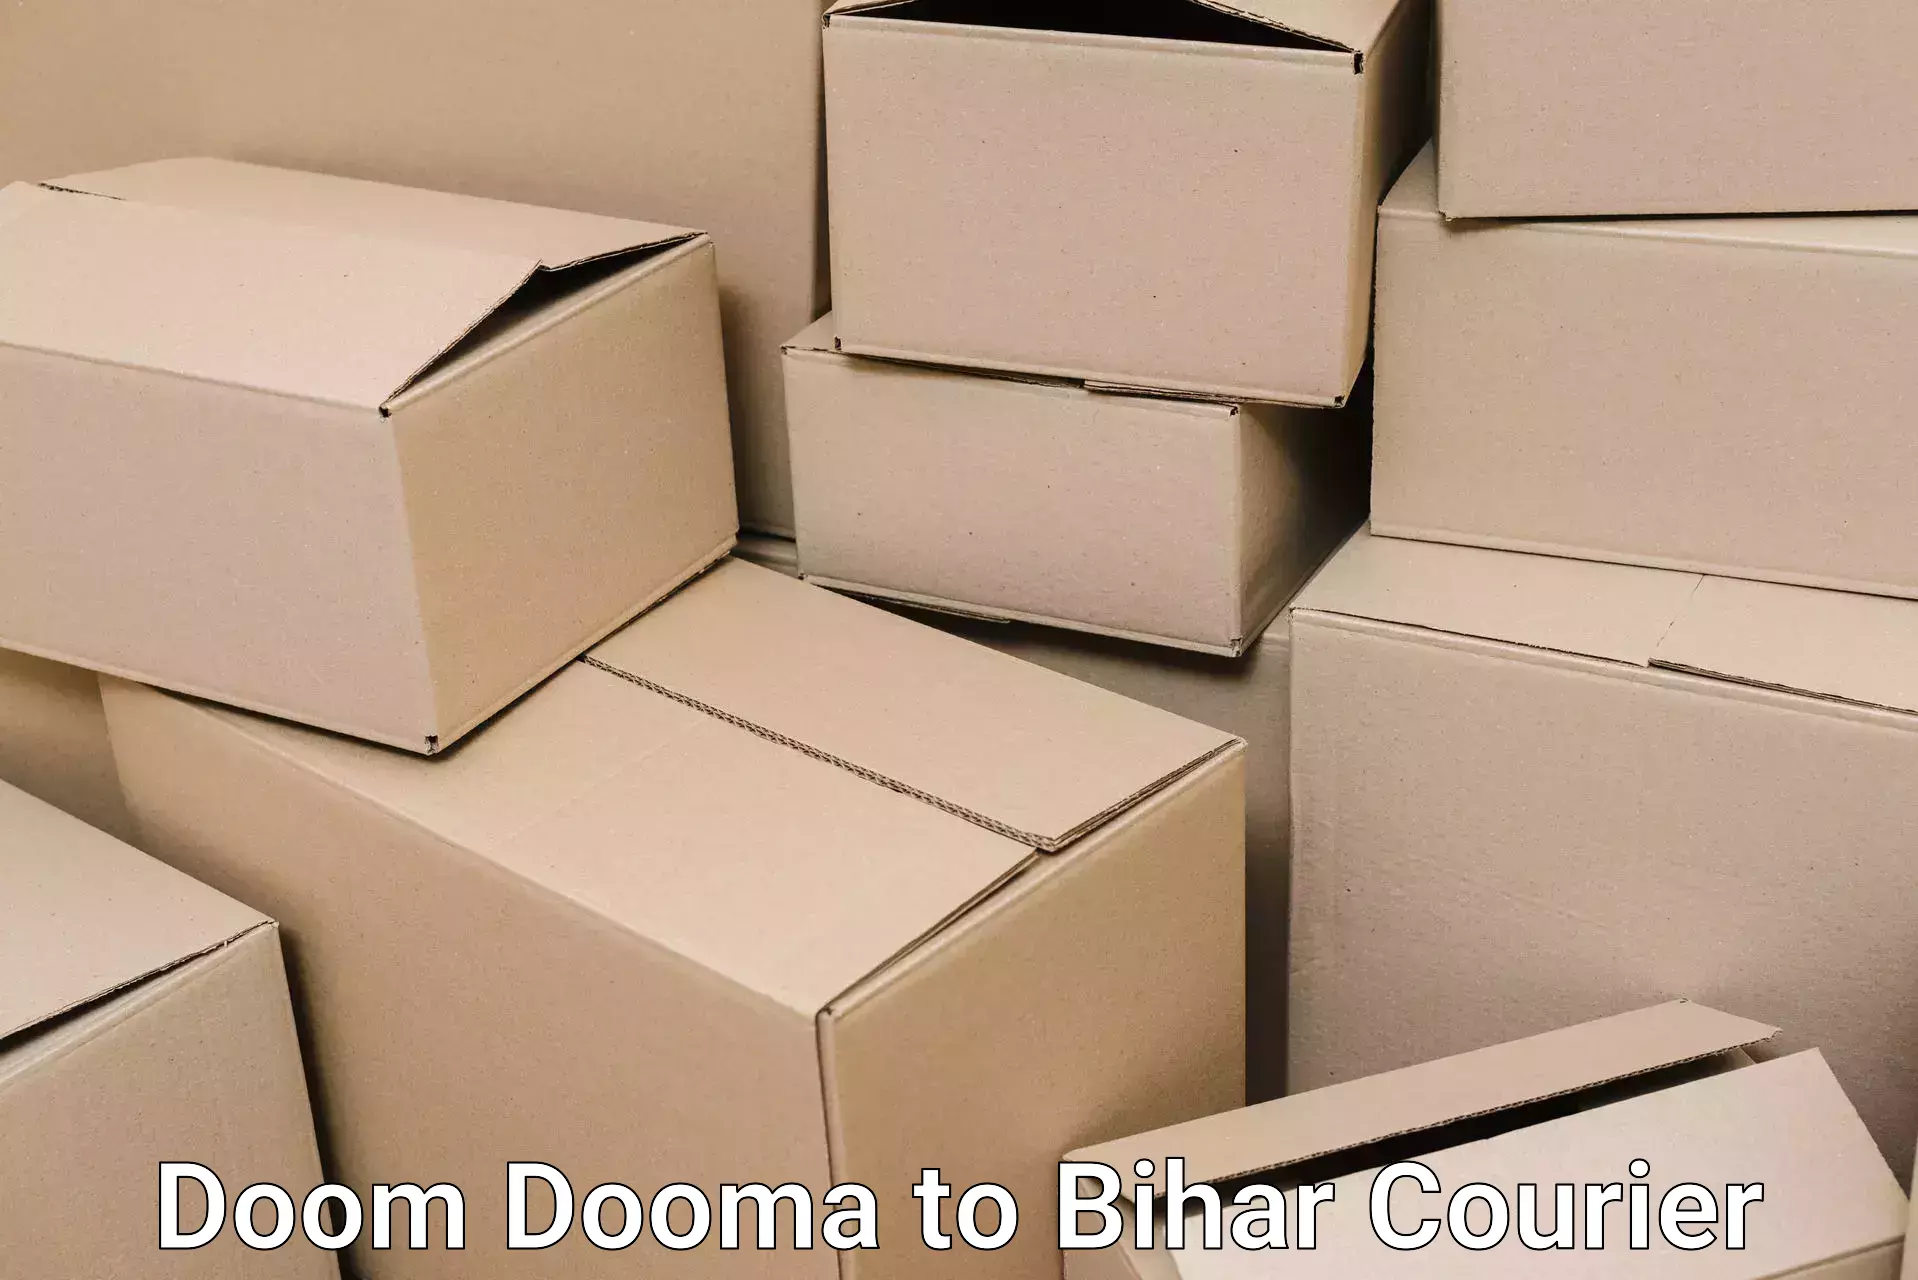 Dependable moving services Doom Dooma to Bihar